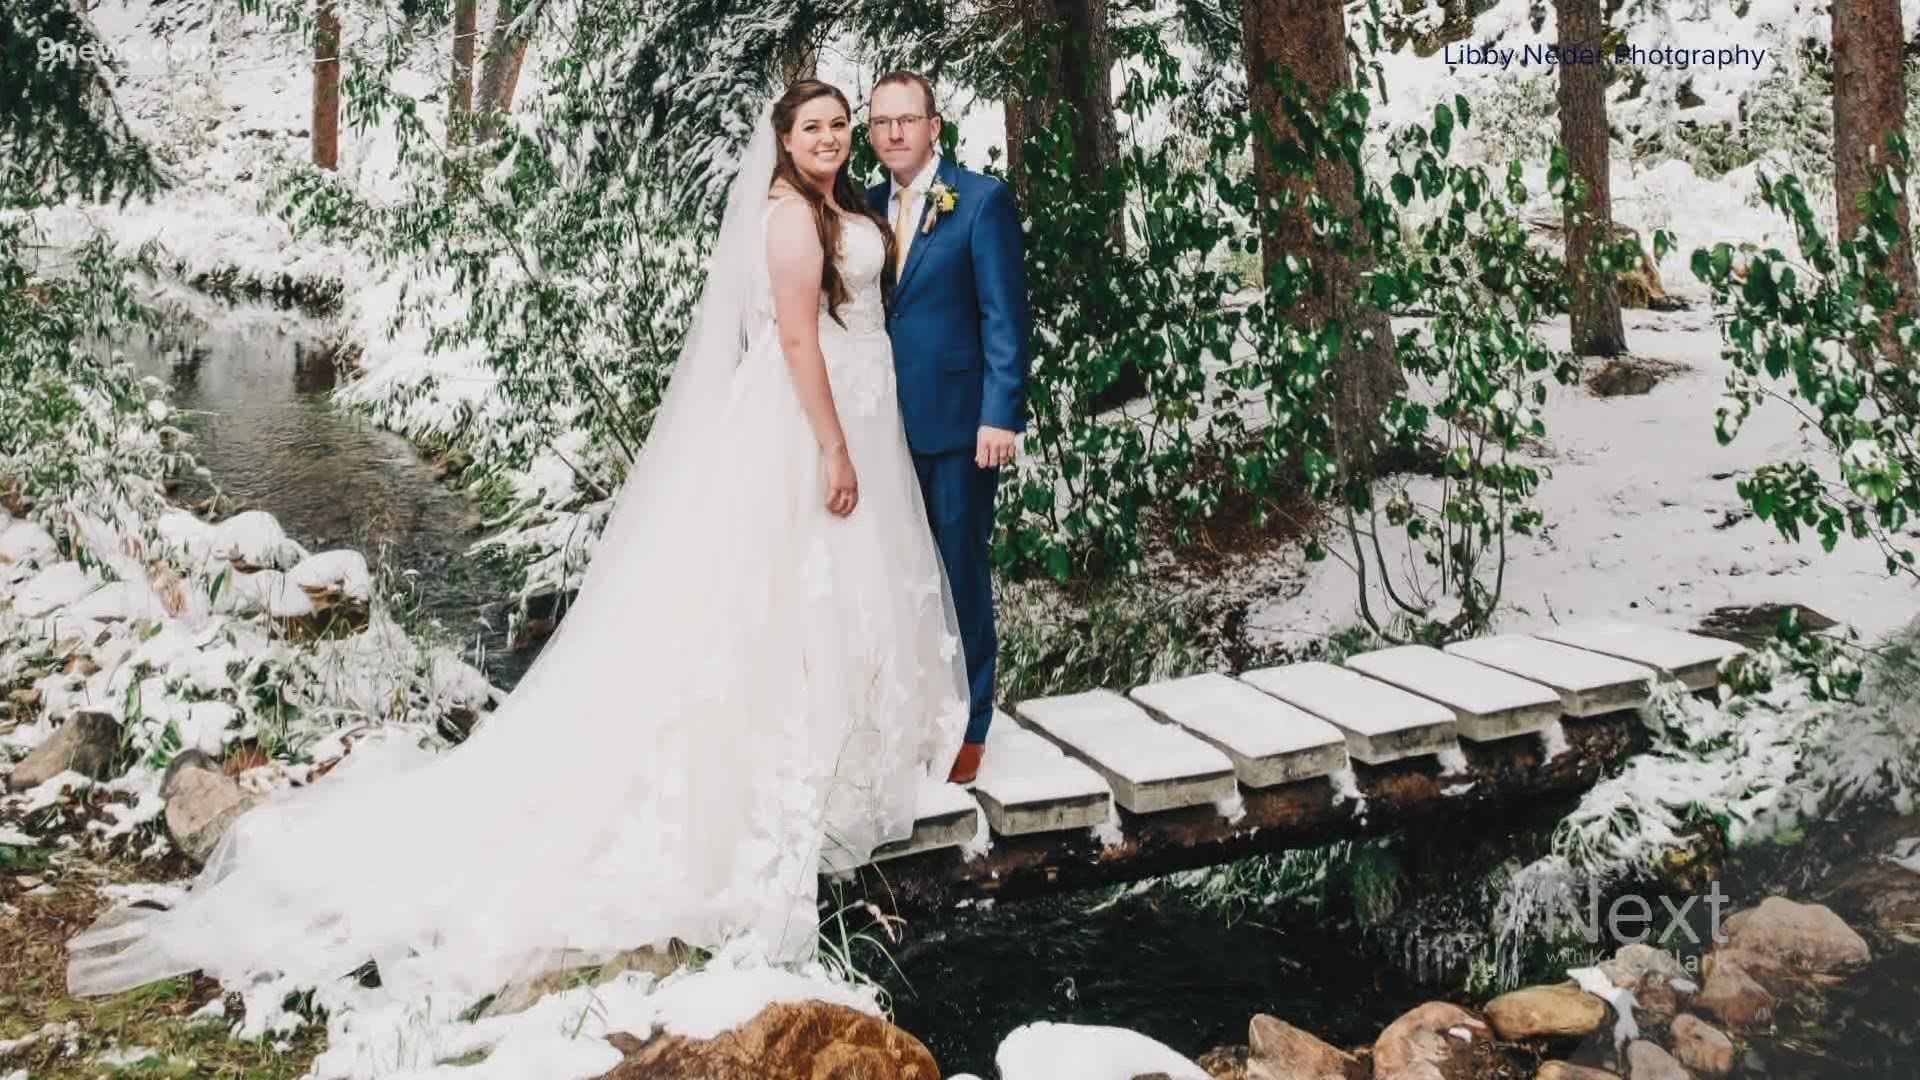 They had big plans for their wedding day but 2020 got in the way. In spite of COVID-19 and an early Colorado snow, Molly and Adam Perko got married in Idaho Springs.